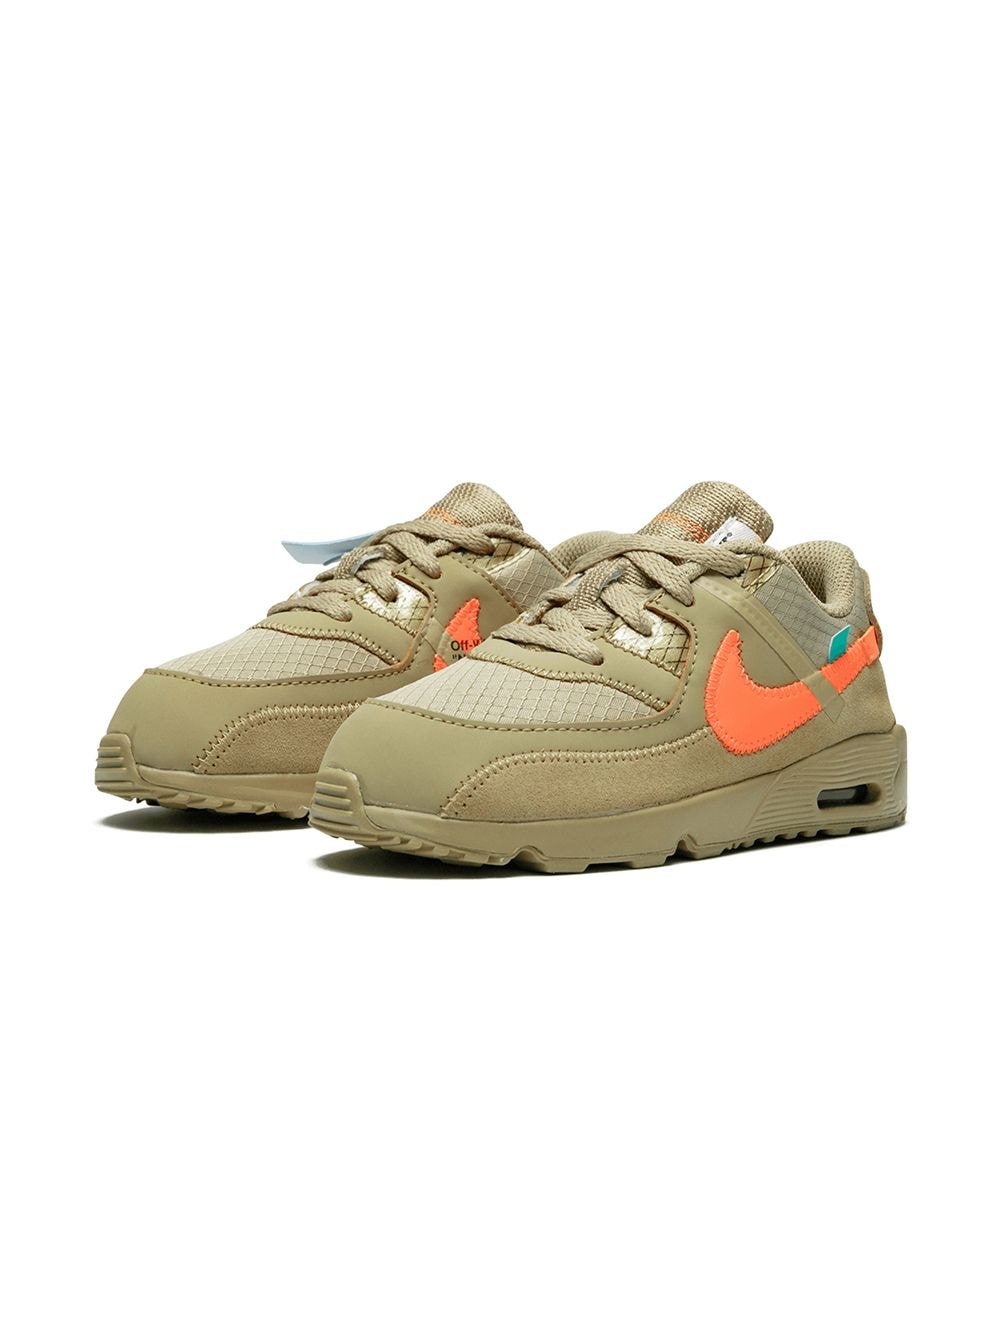 Image 2 of Nike Kids x Off-White Air Max 90 BT "Desert Ore" sneakers